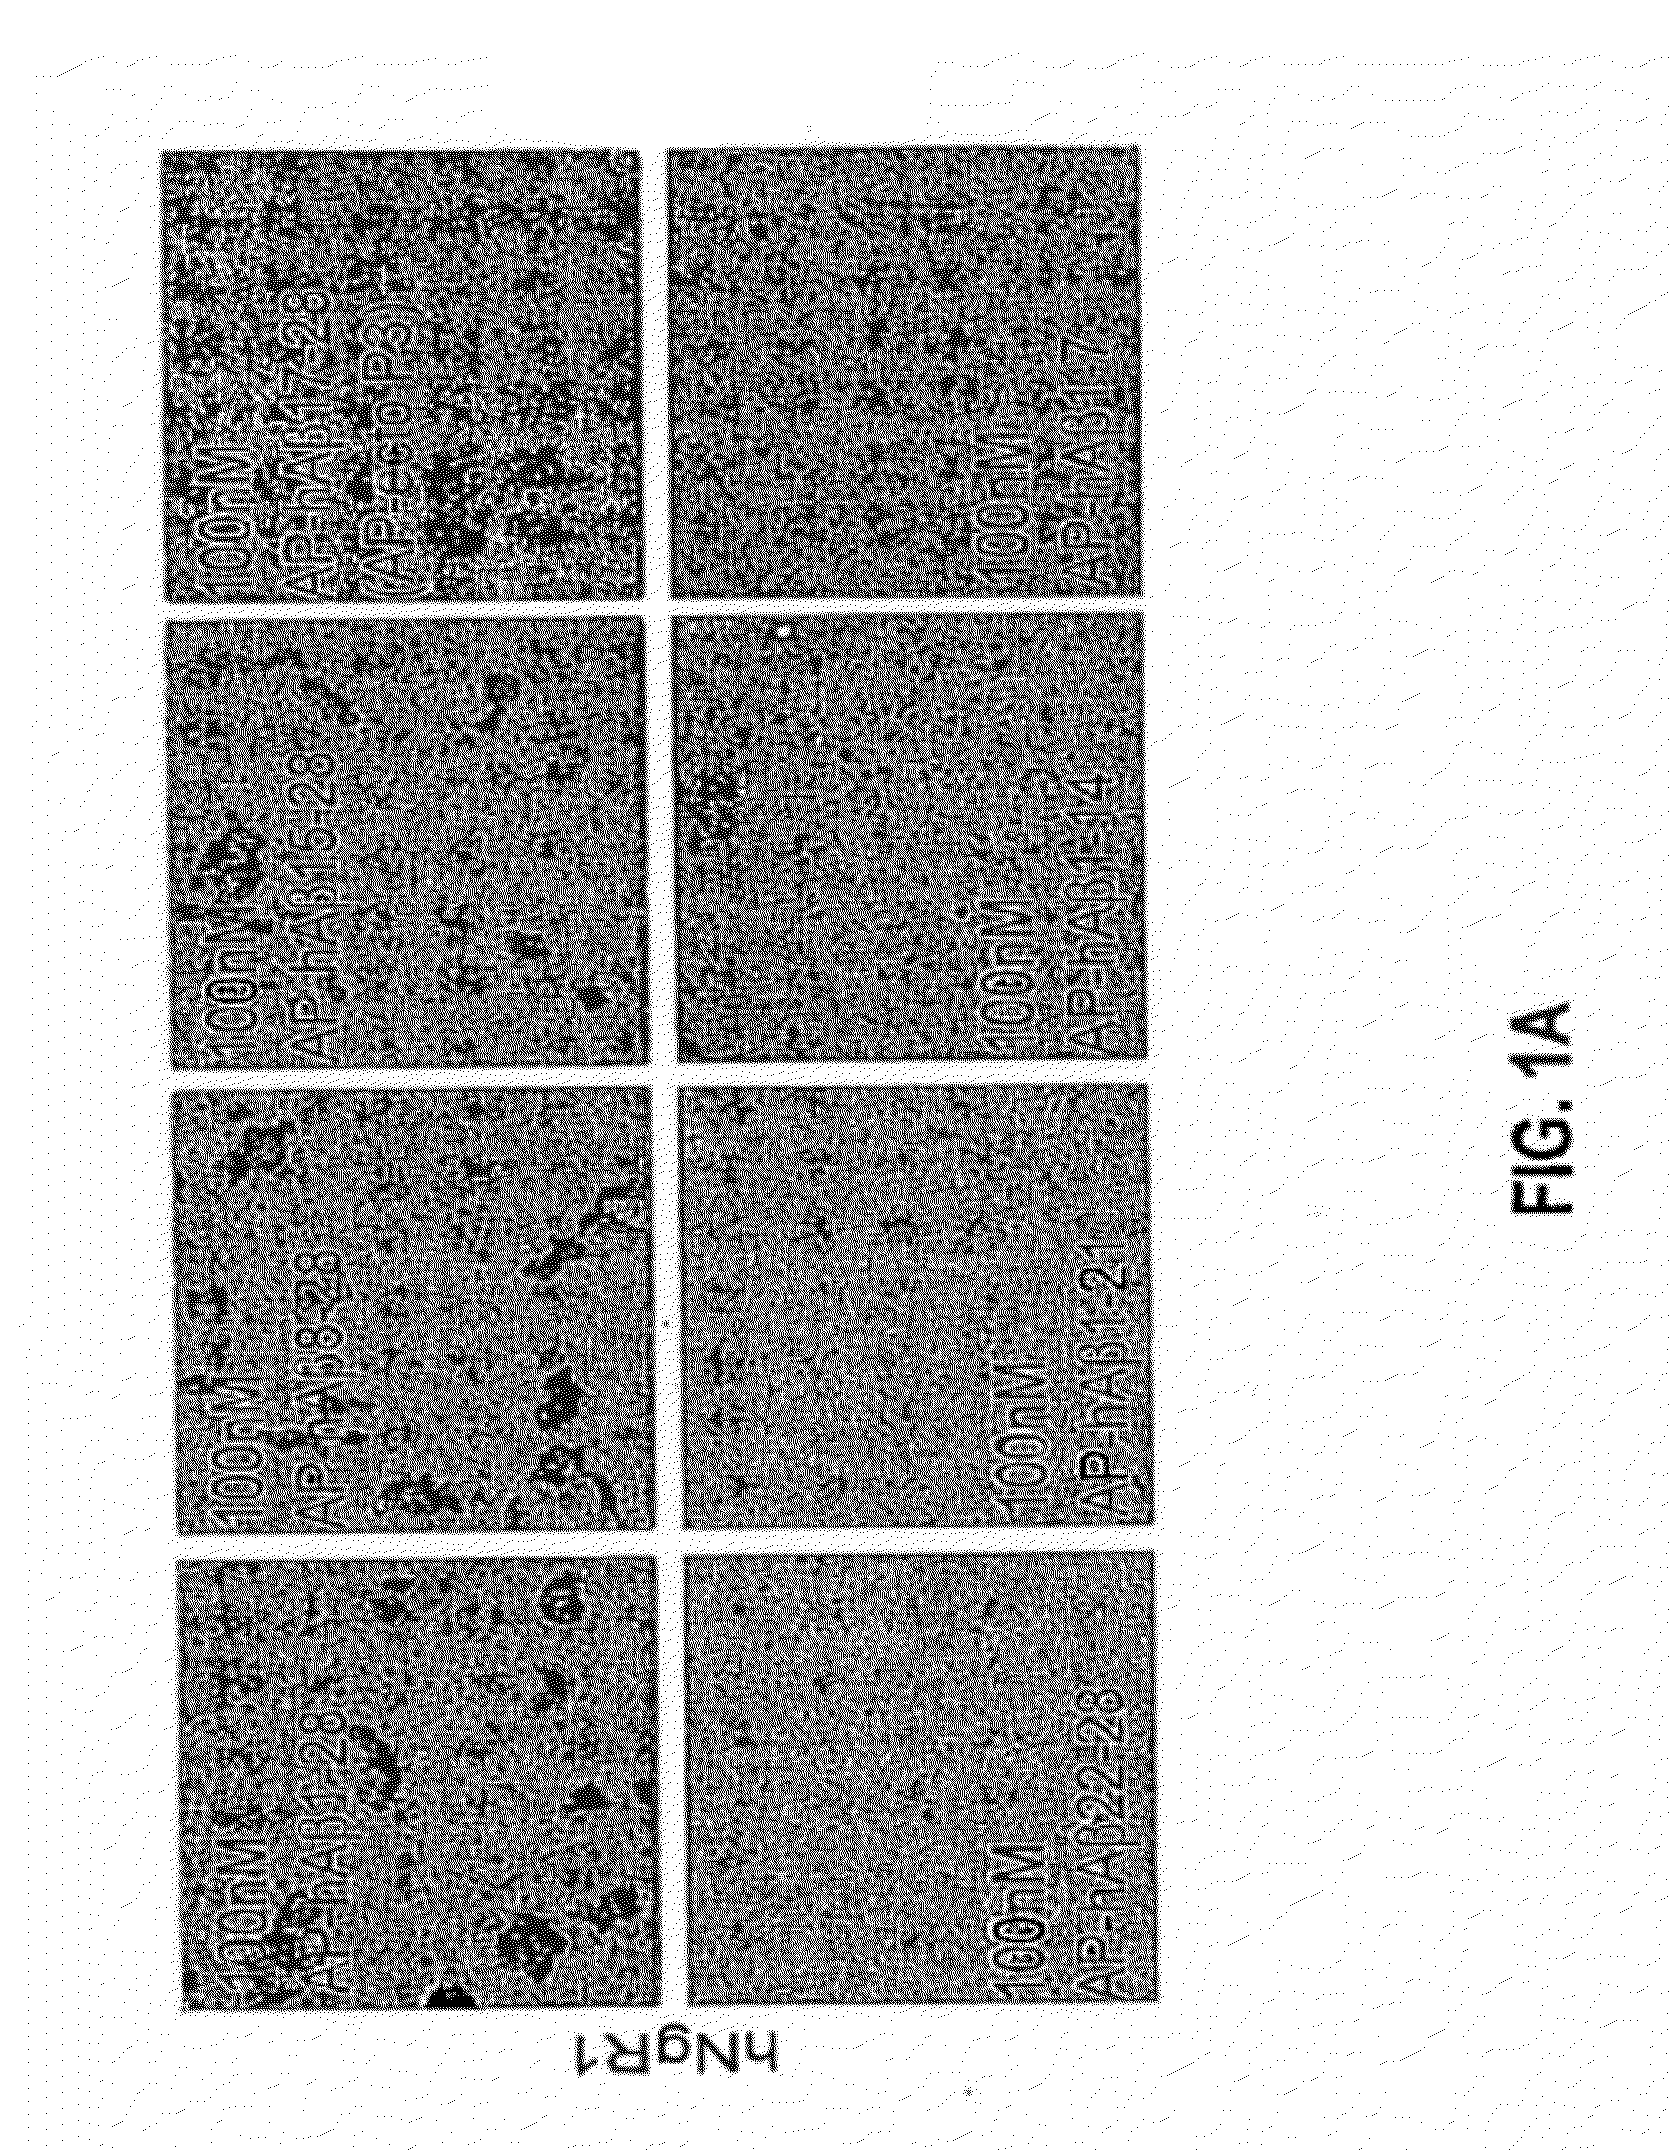 Methods Relating to Peripheral Administration of Nogo Receptor Polypeptides